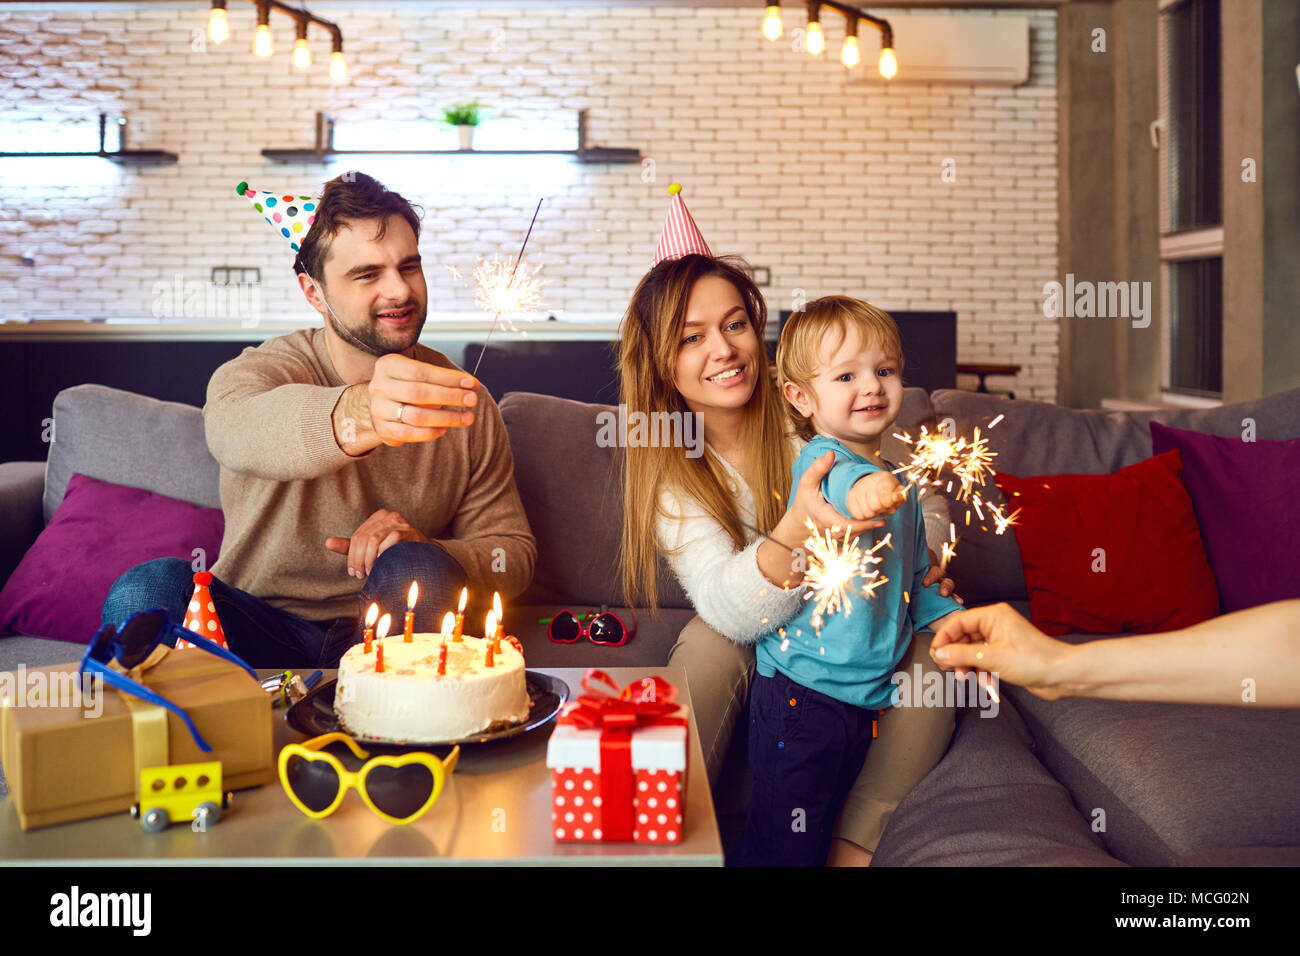 Parents with a cake with candles congratulate their child on his birthday. Stock Photo